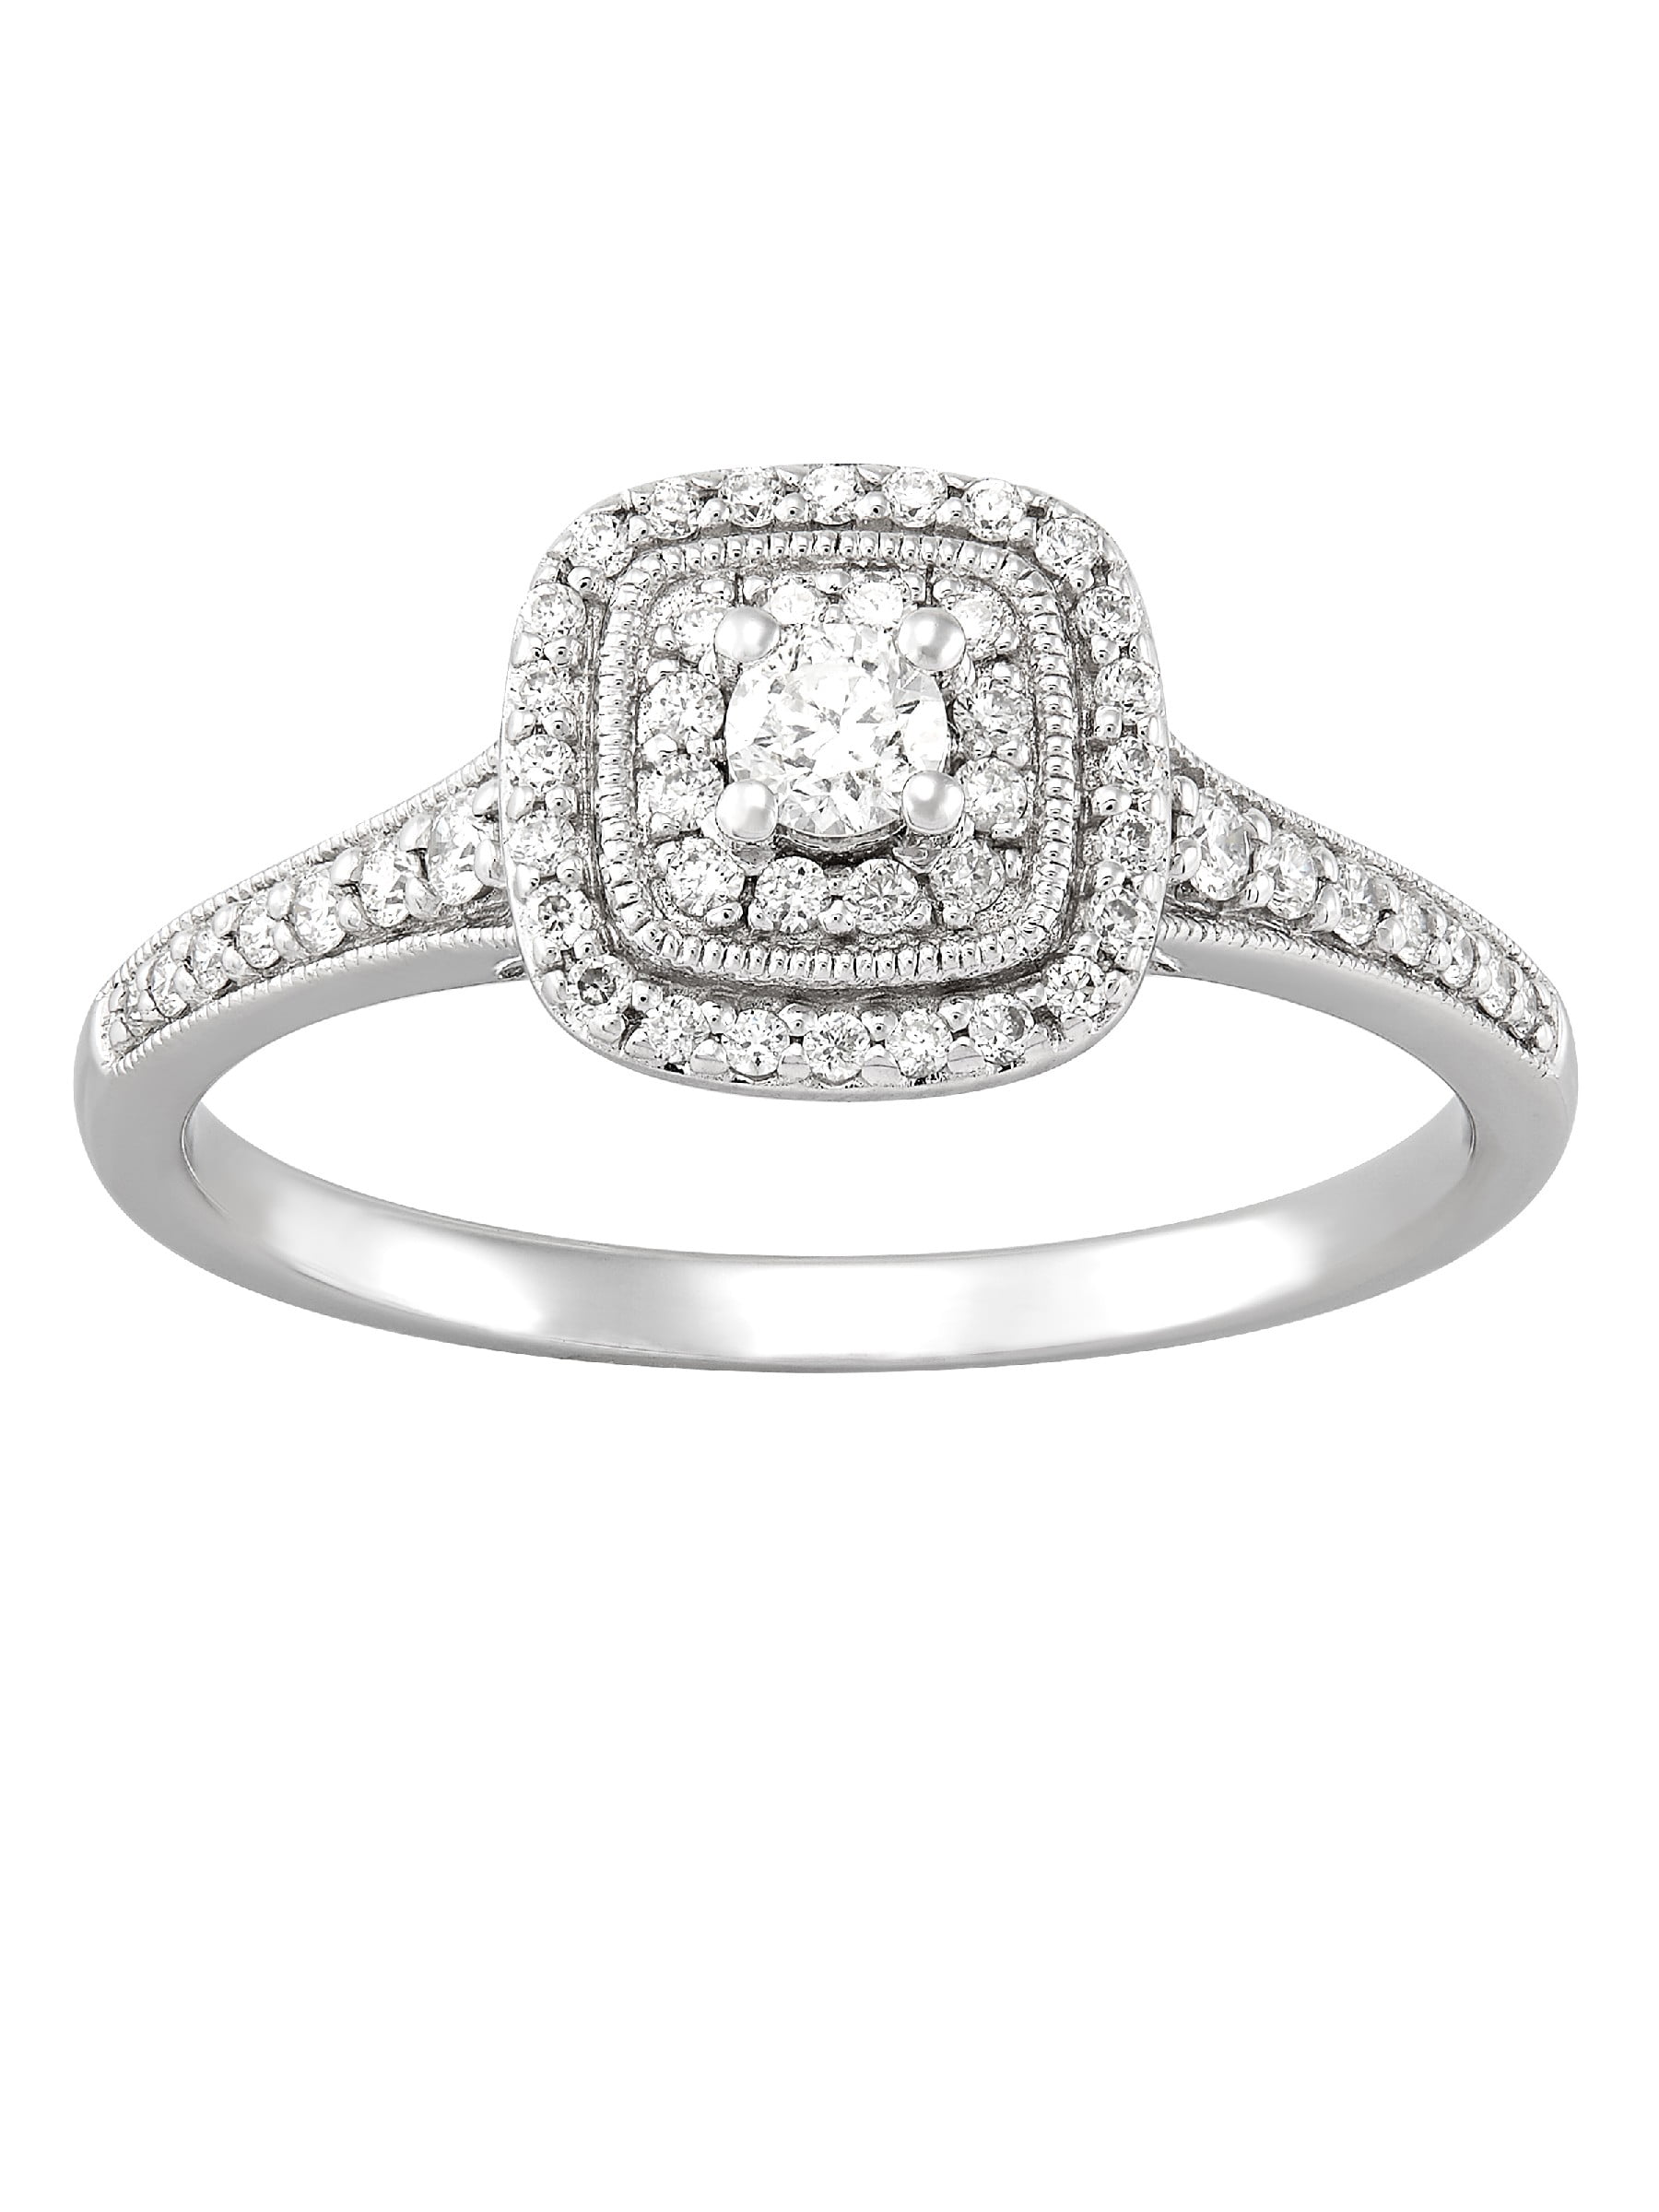 Finecraft Women's 1/3 ct Diamond Cushion Halo Engagement Ring in 10kt